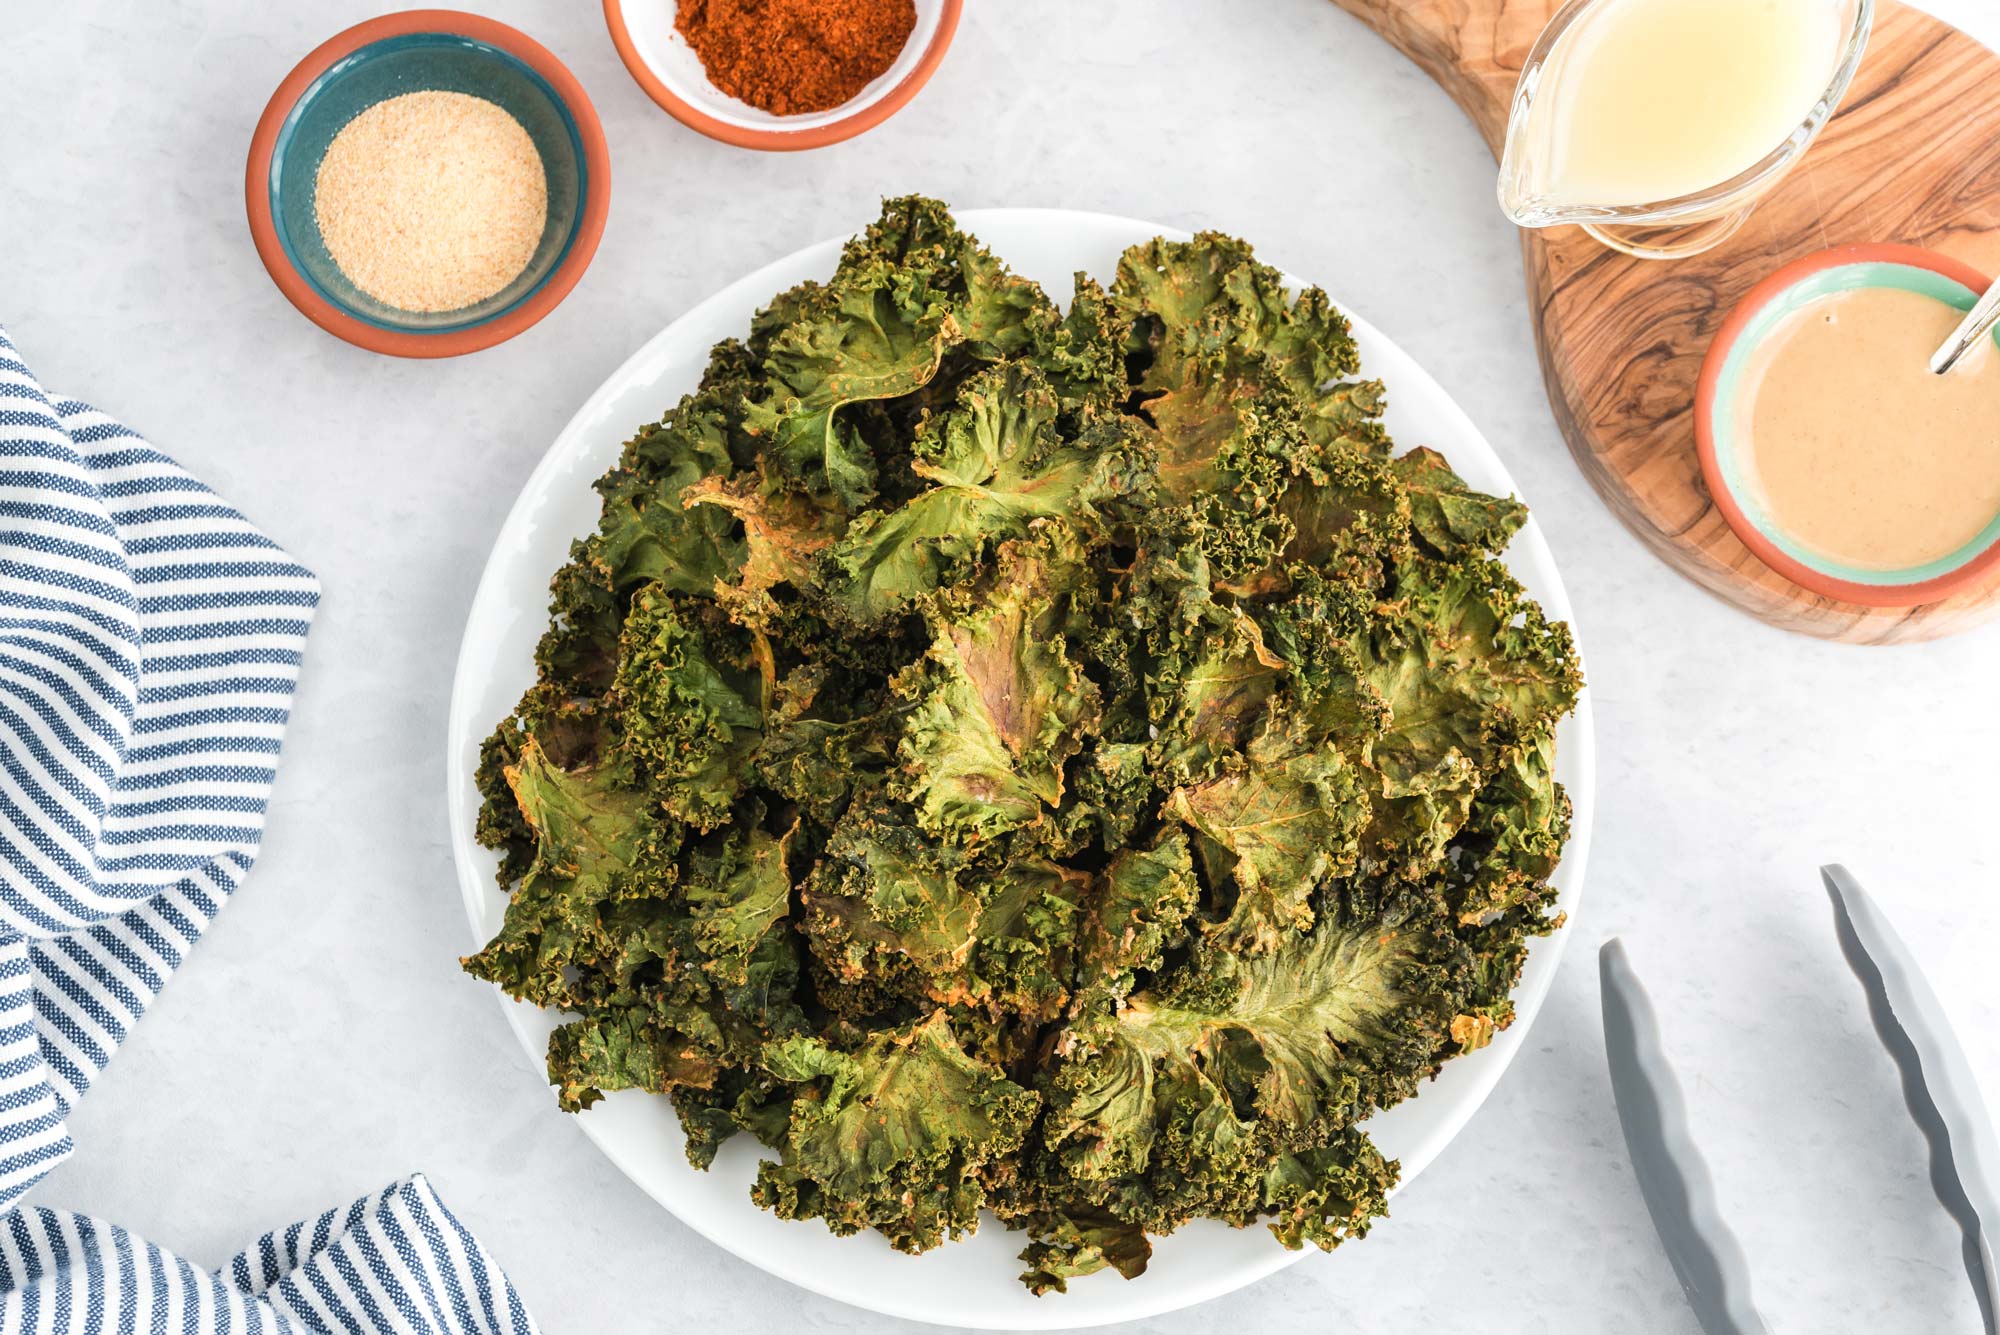 chili lime kale chips on plate